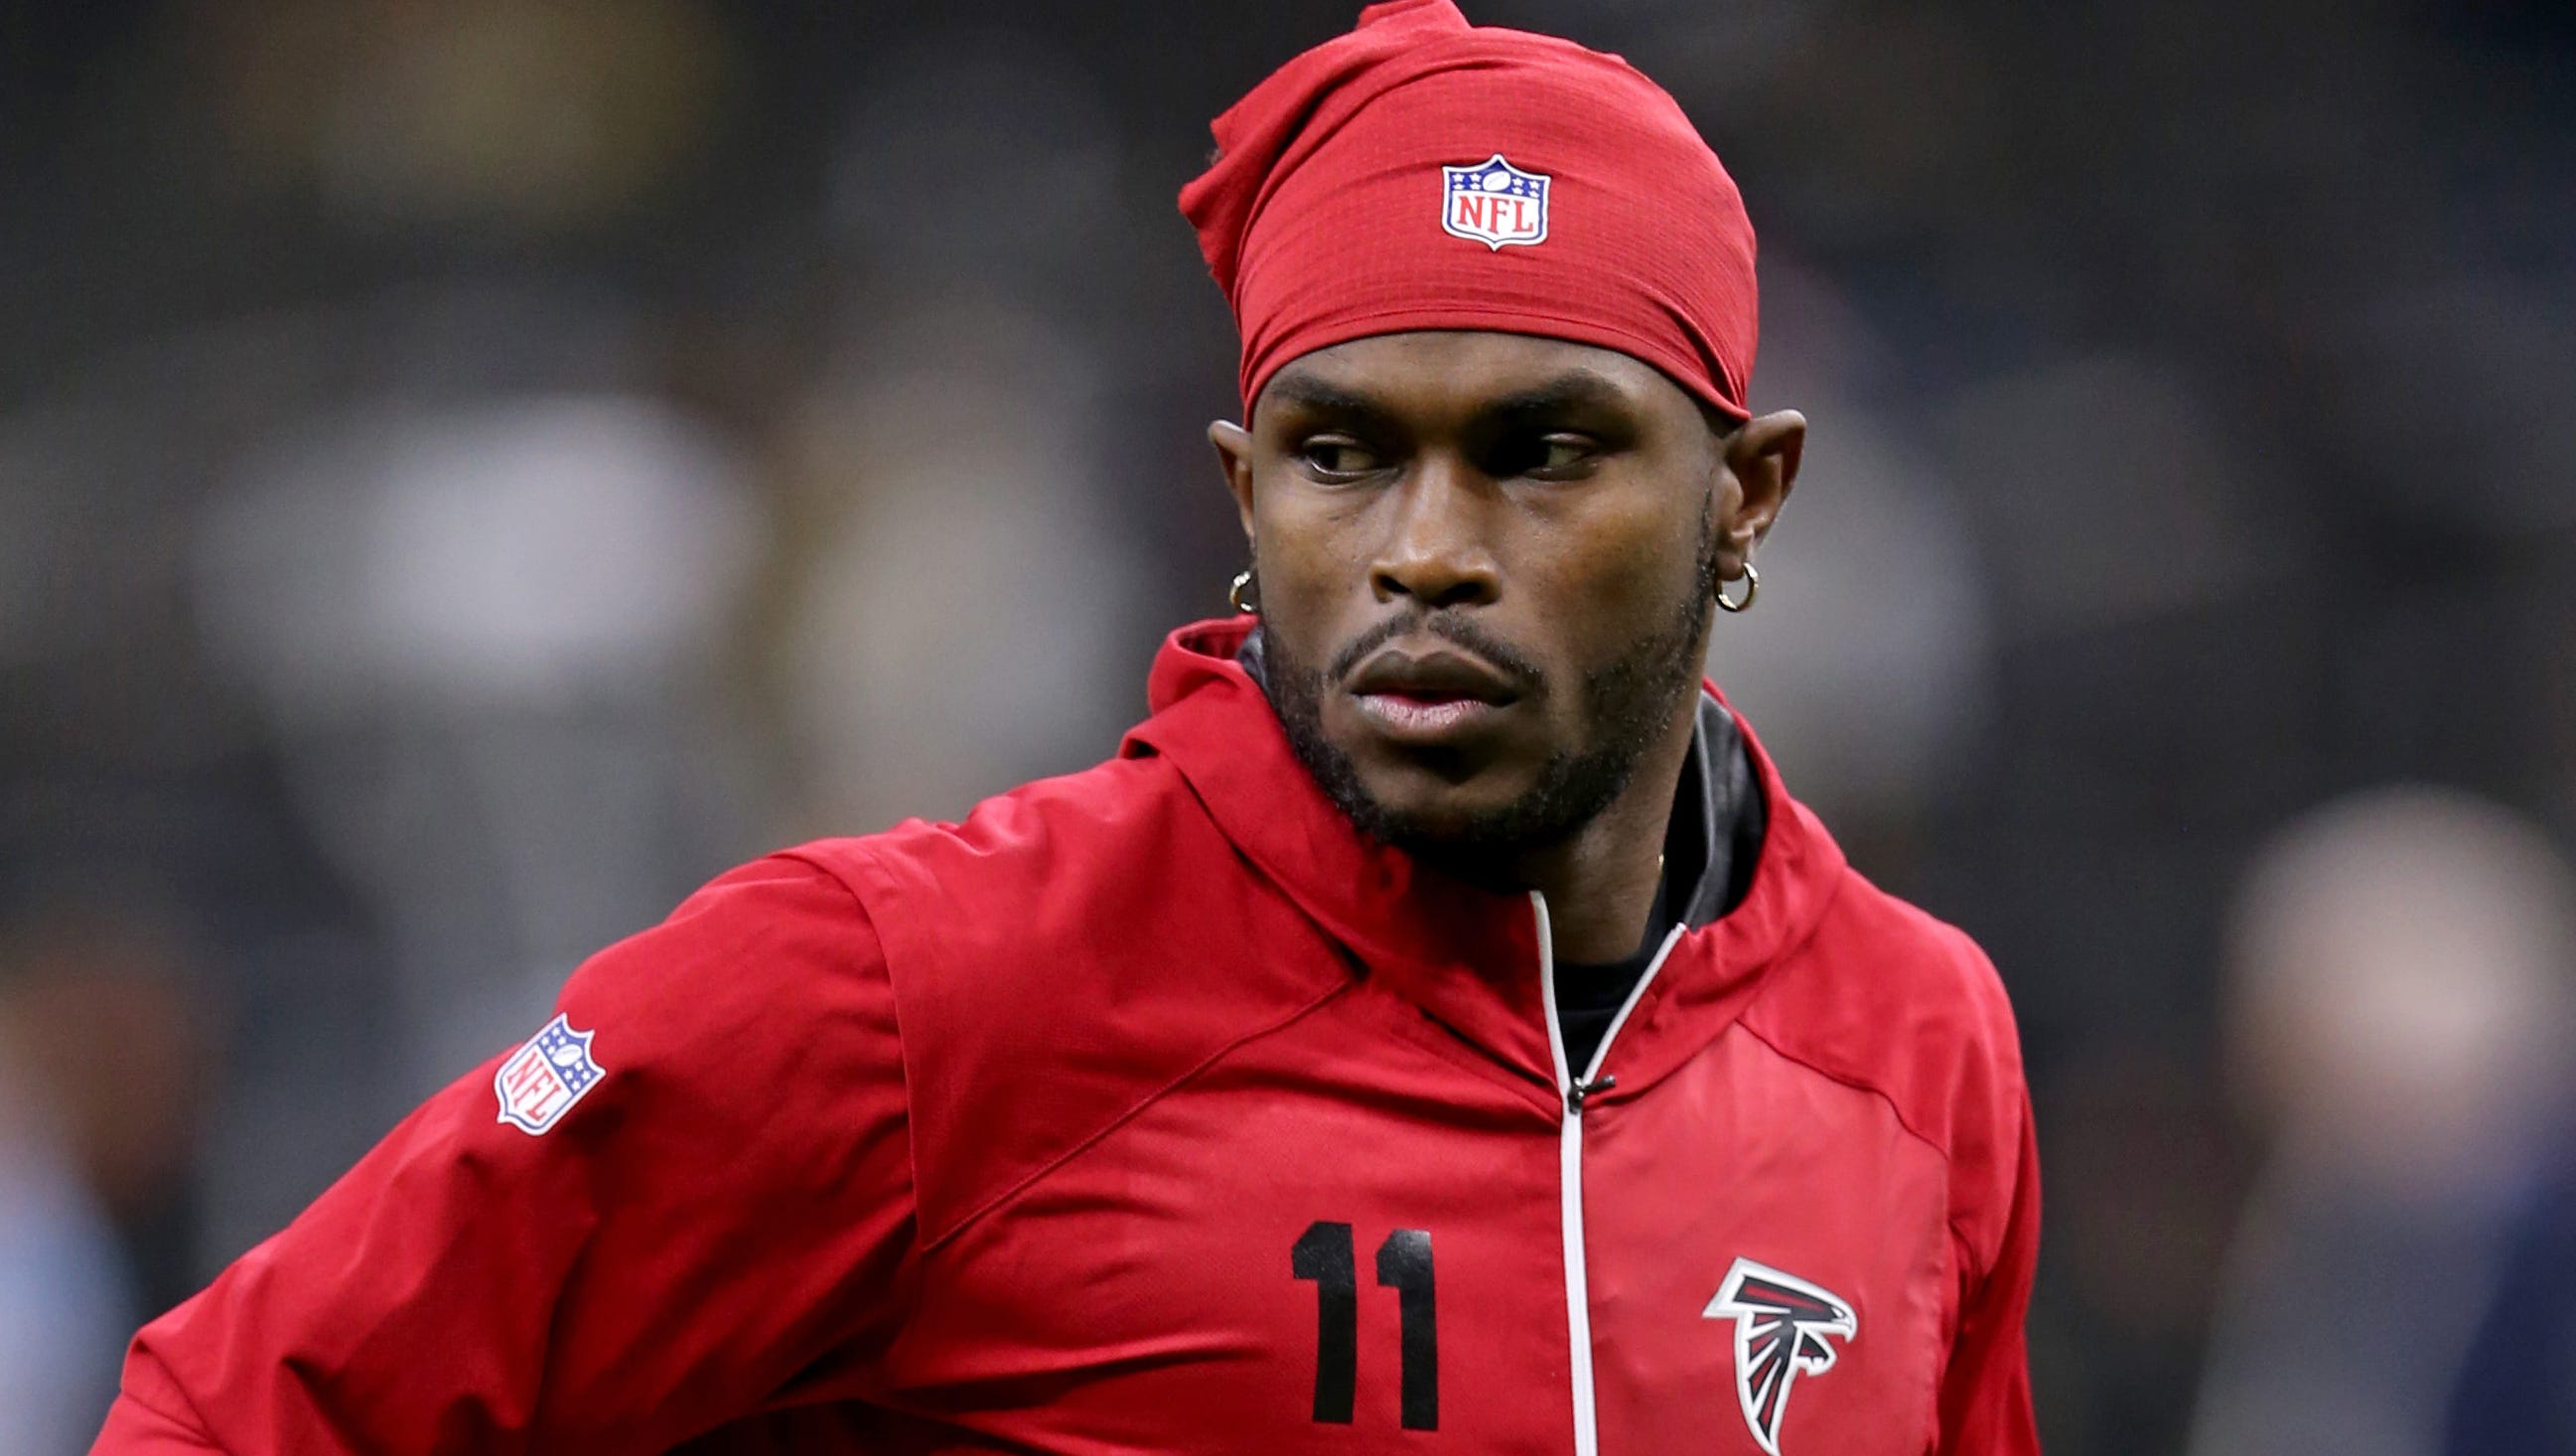 Julio Jones won't report to Falcons training camp on time, per reports